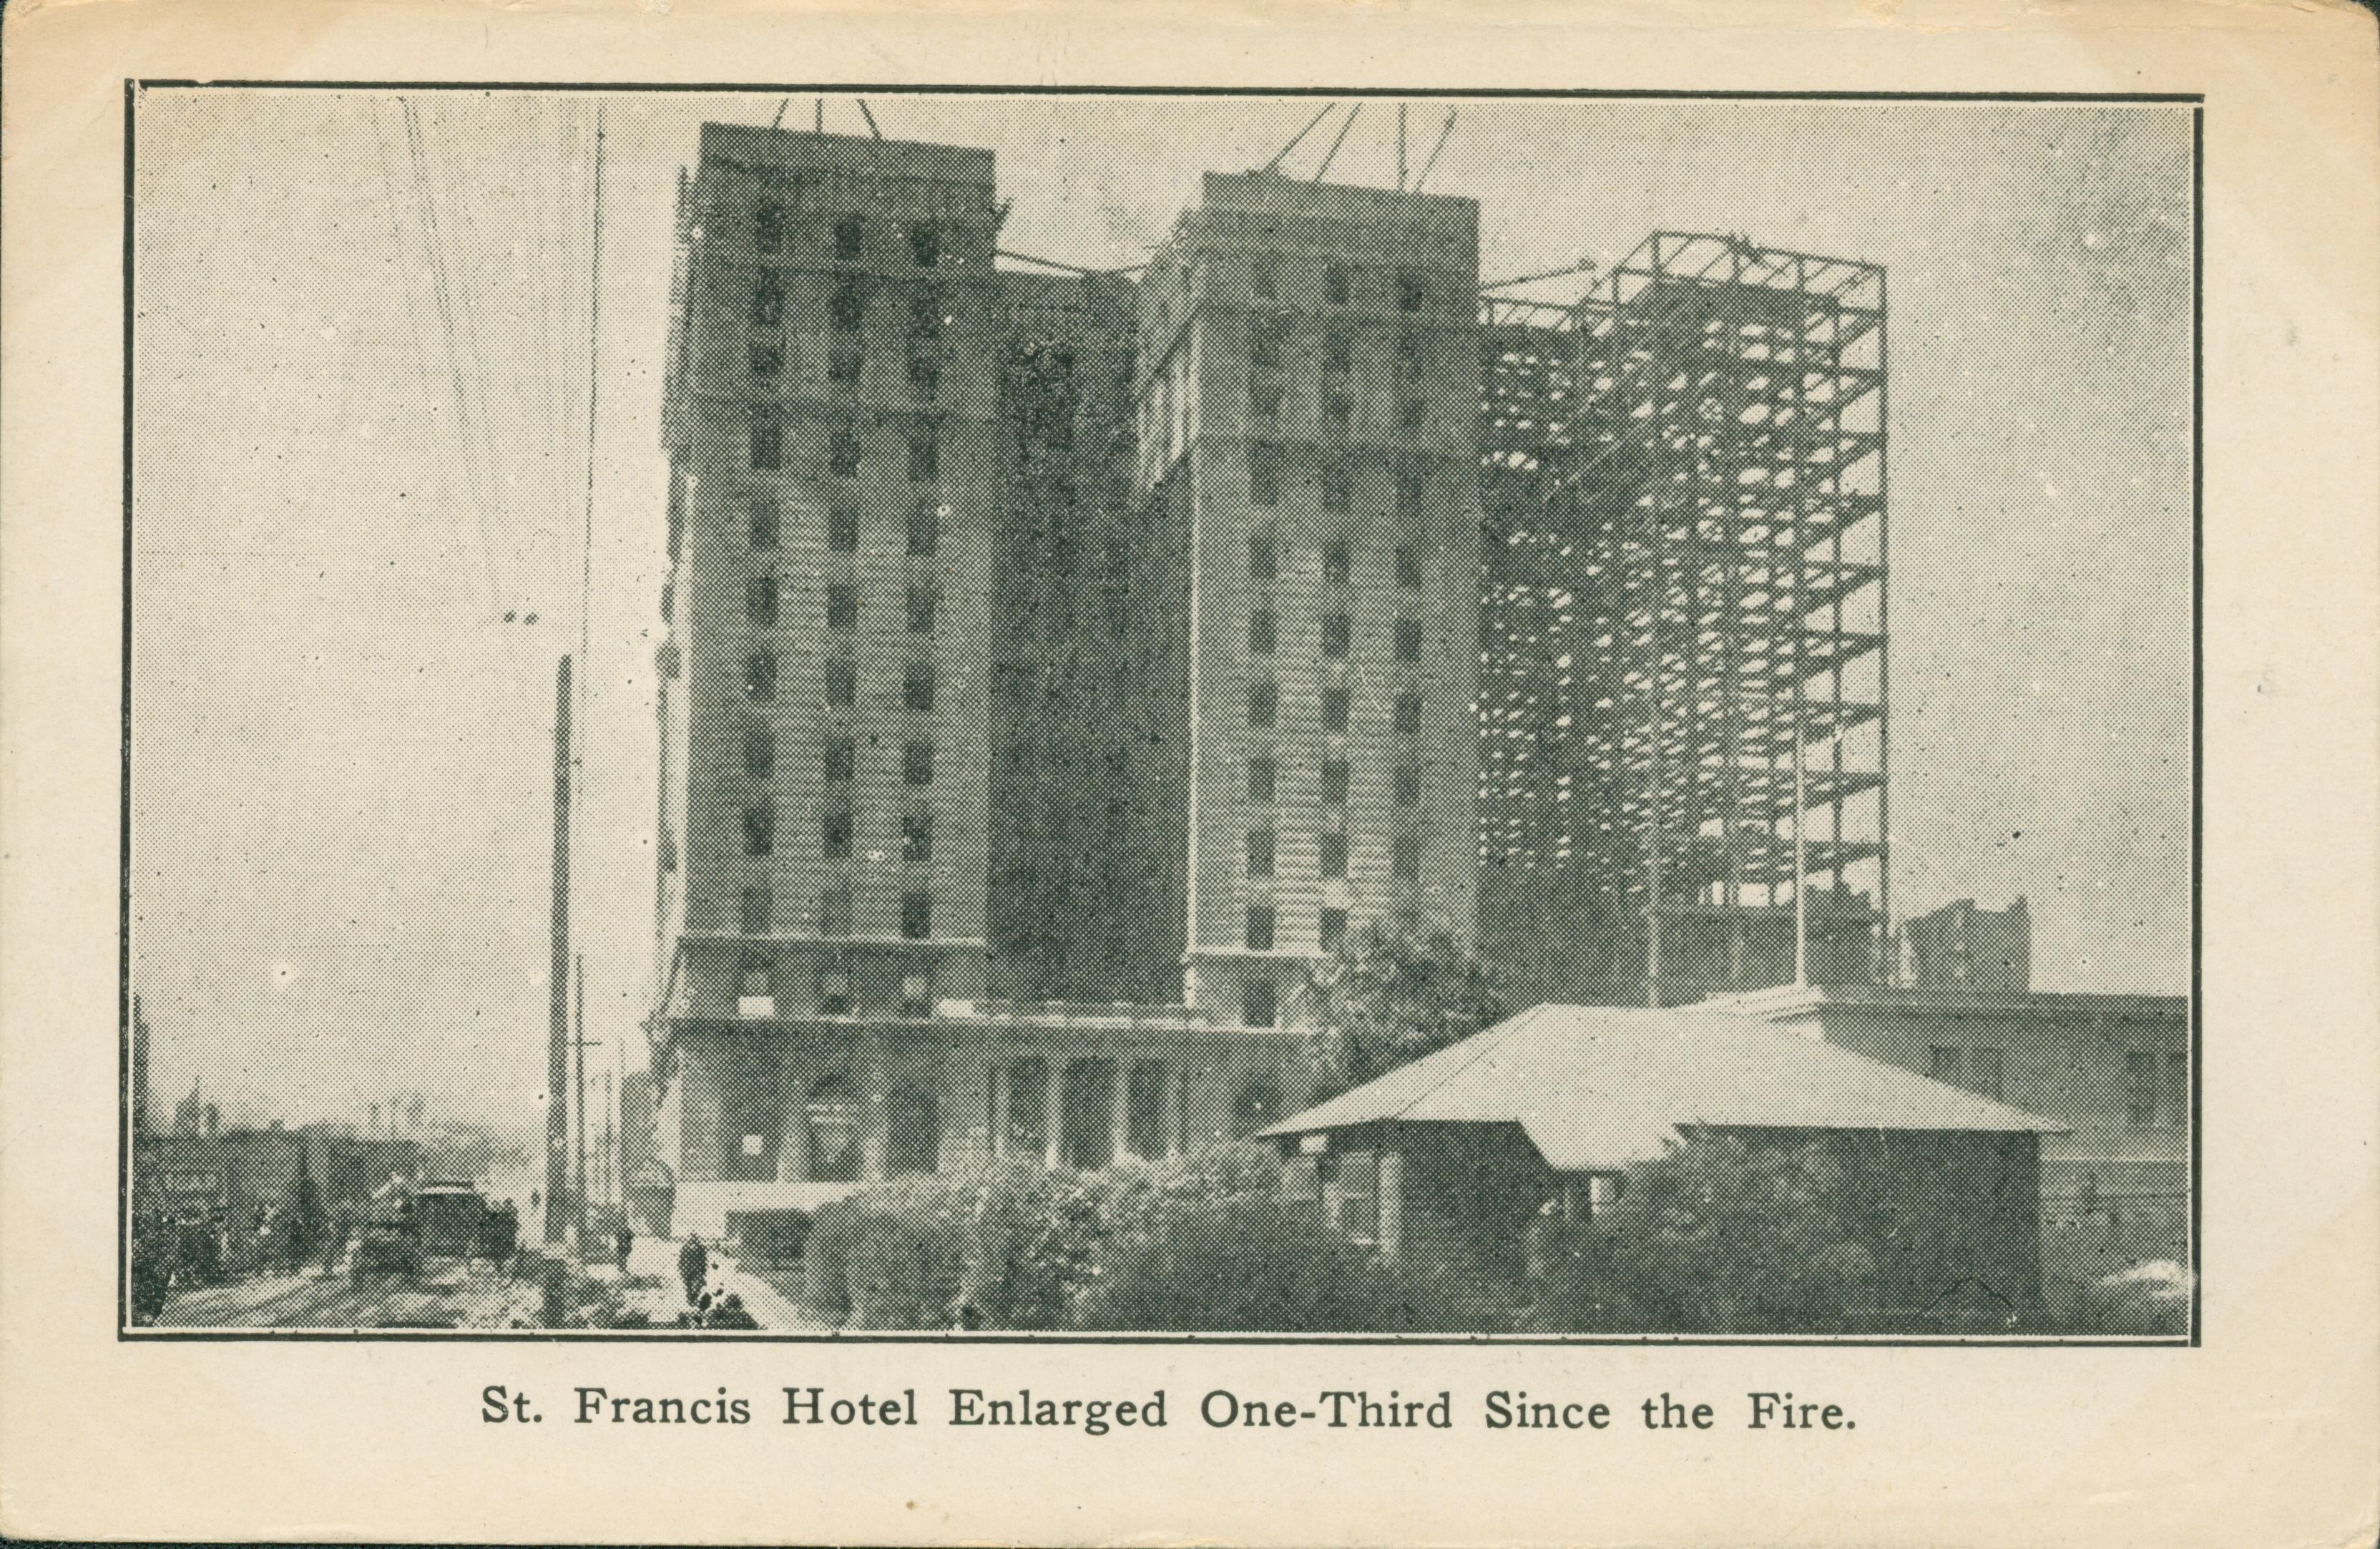 Shows the St. Francis Hotel under construction.